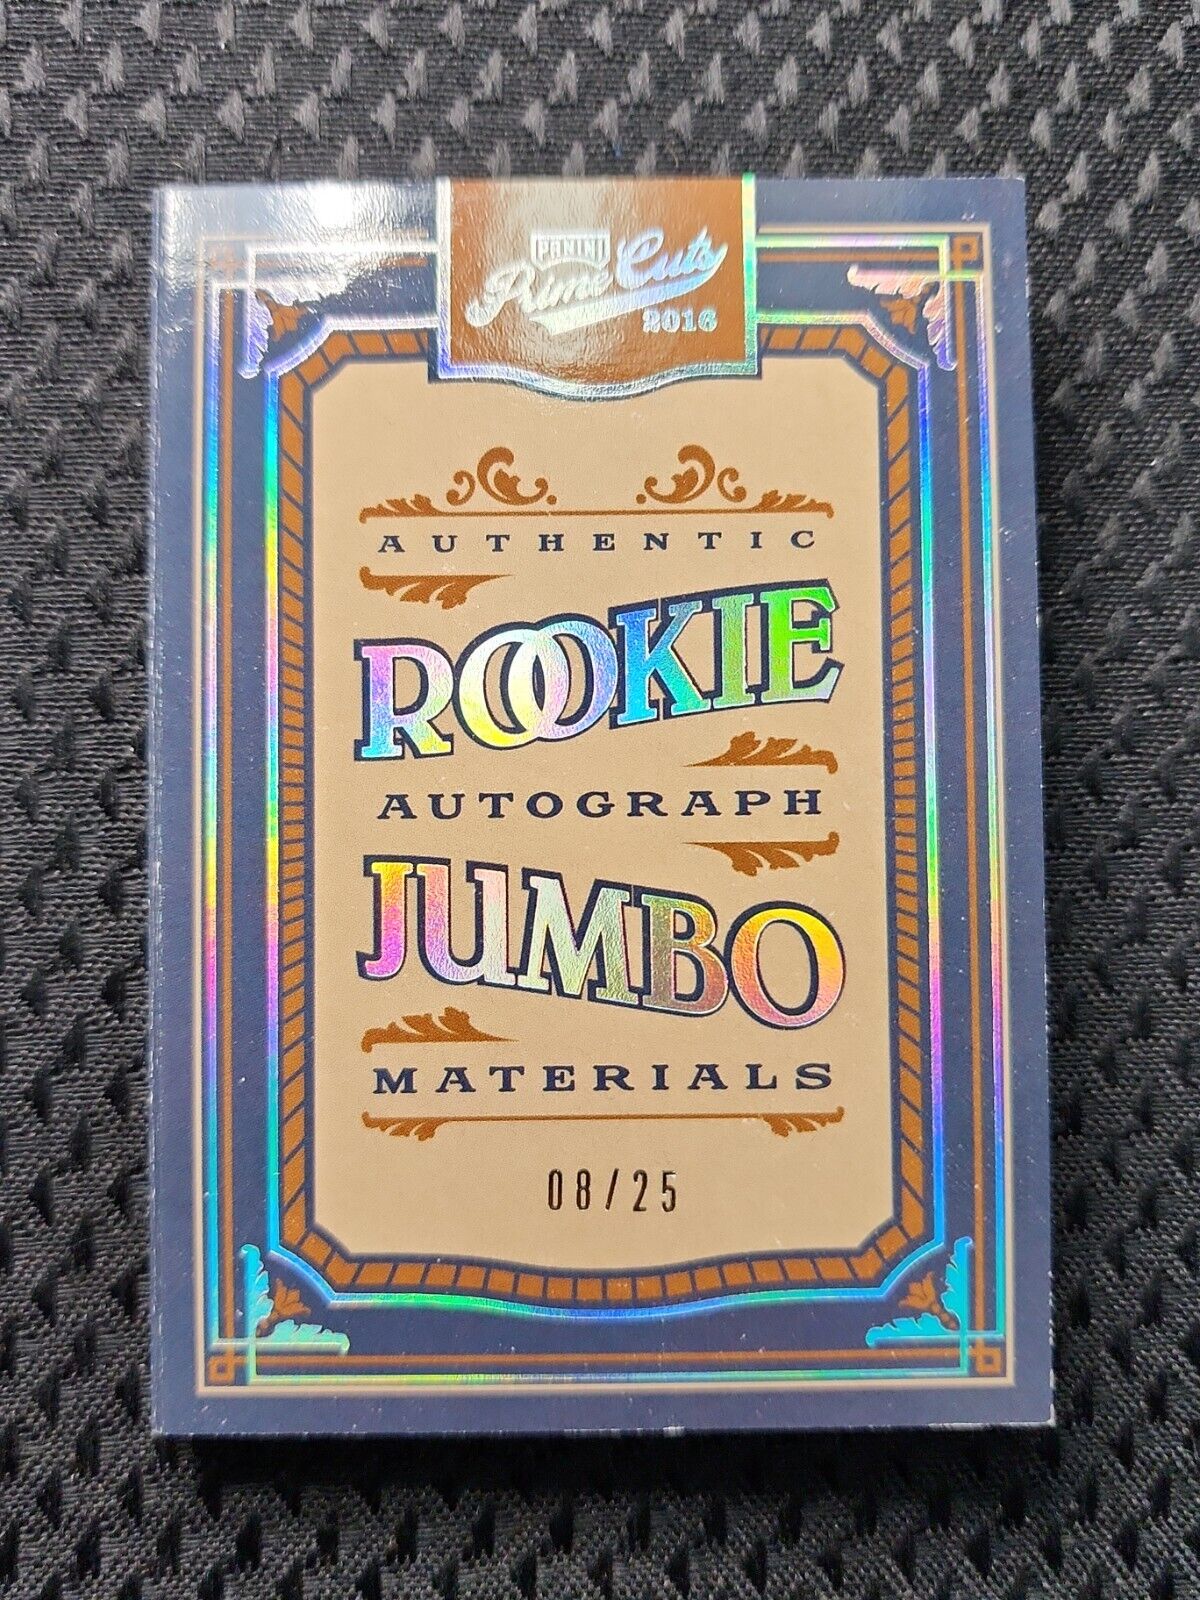 2016 Panini Prime Cuts /25 Byung-Ho Park  Rookie Auto RC Booklet